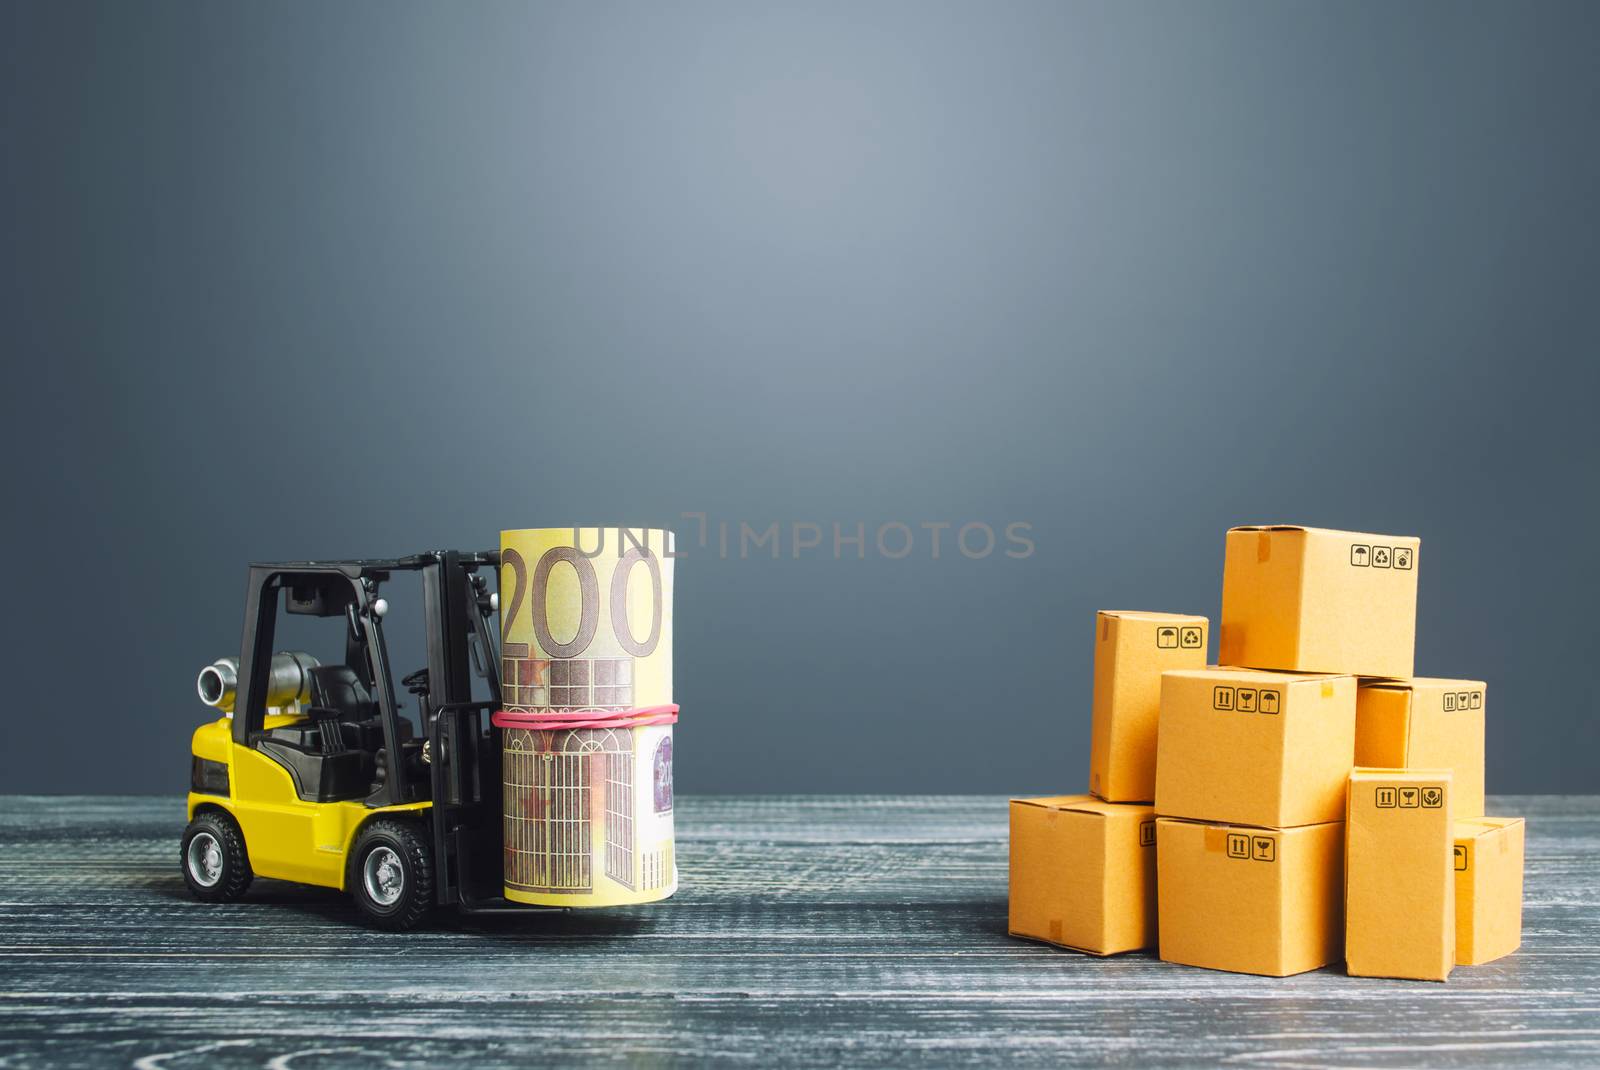 Forklift truck carries a euro bundle roll near stack of boxes. Profit from trade, exchange of goods. Investments financing in production, taxes, income revenues costs. High productivity superprofits by iLixe48